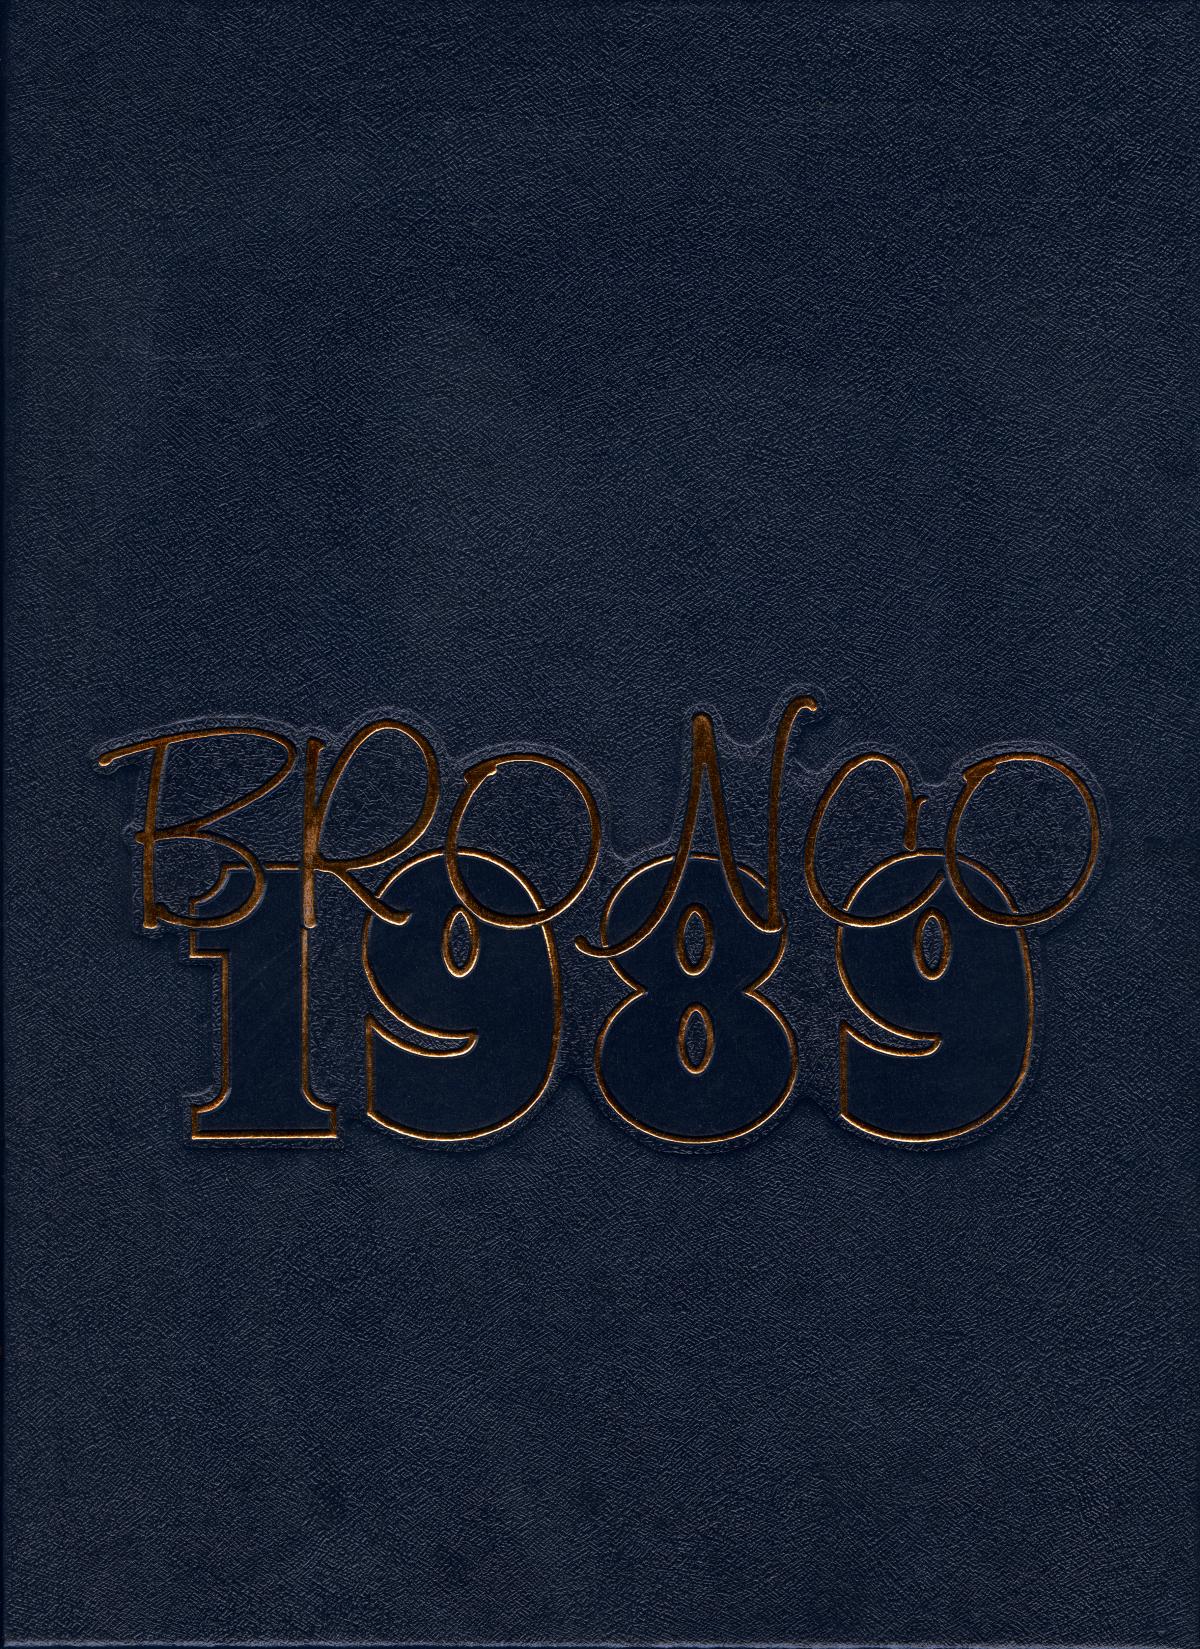 The Bronco, Yearbook of Hardin-Simmons University, 1989
                                                
                                                    Front Cover
                                                